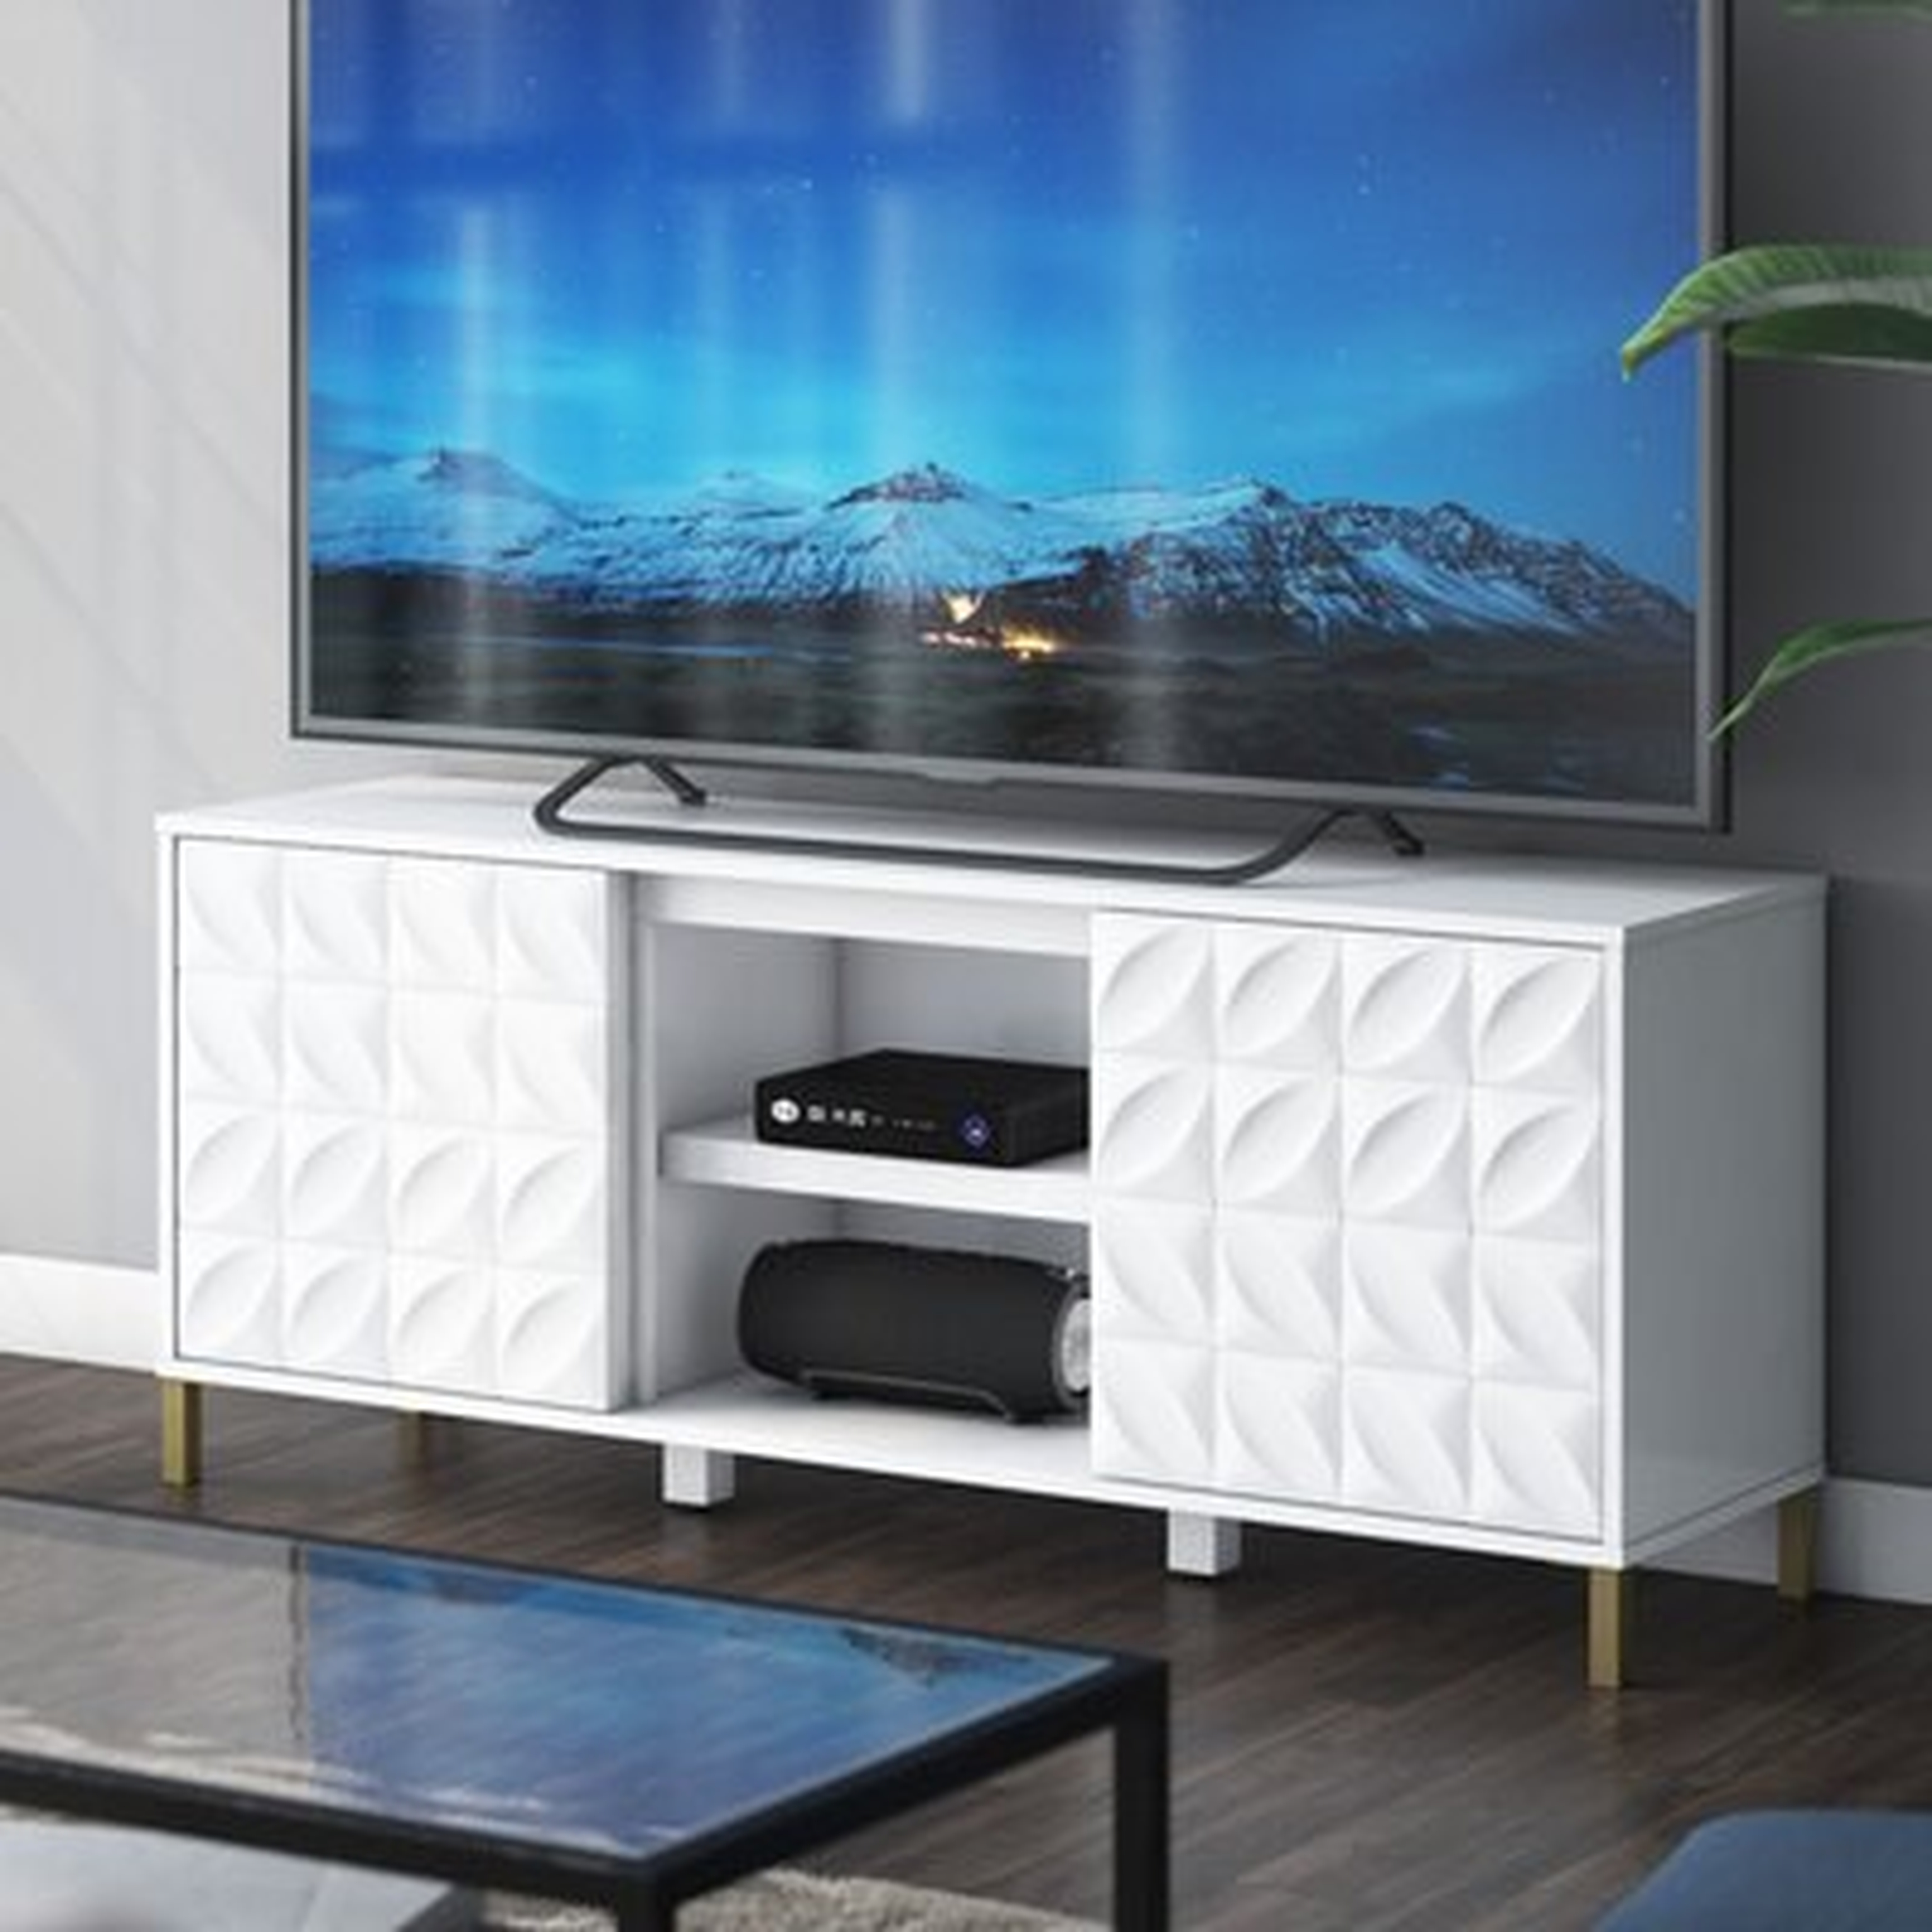 Mitchellville TV Stand for TVs up to 60" - Wayfair